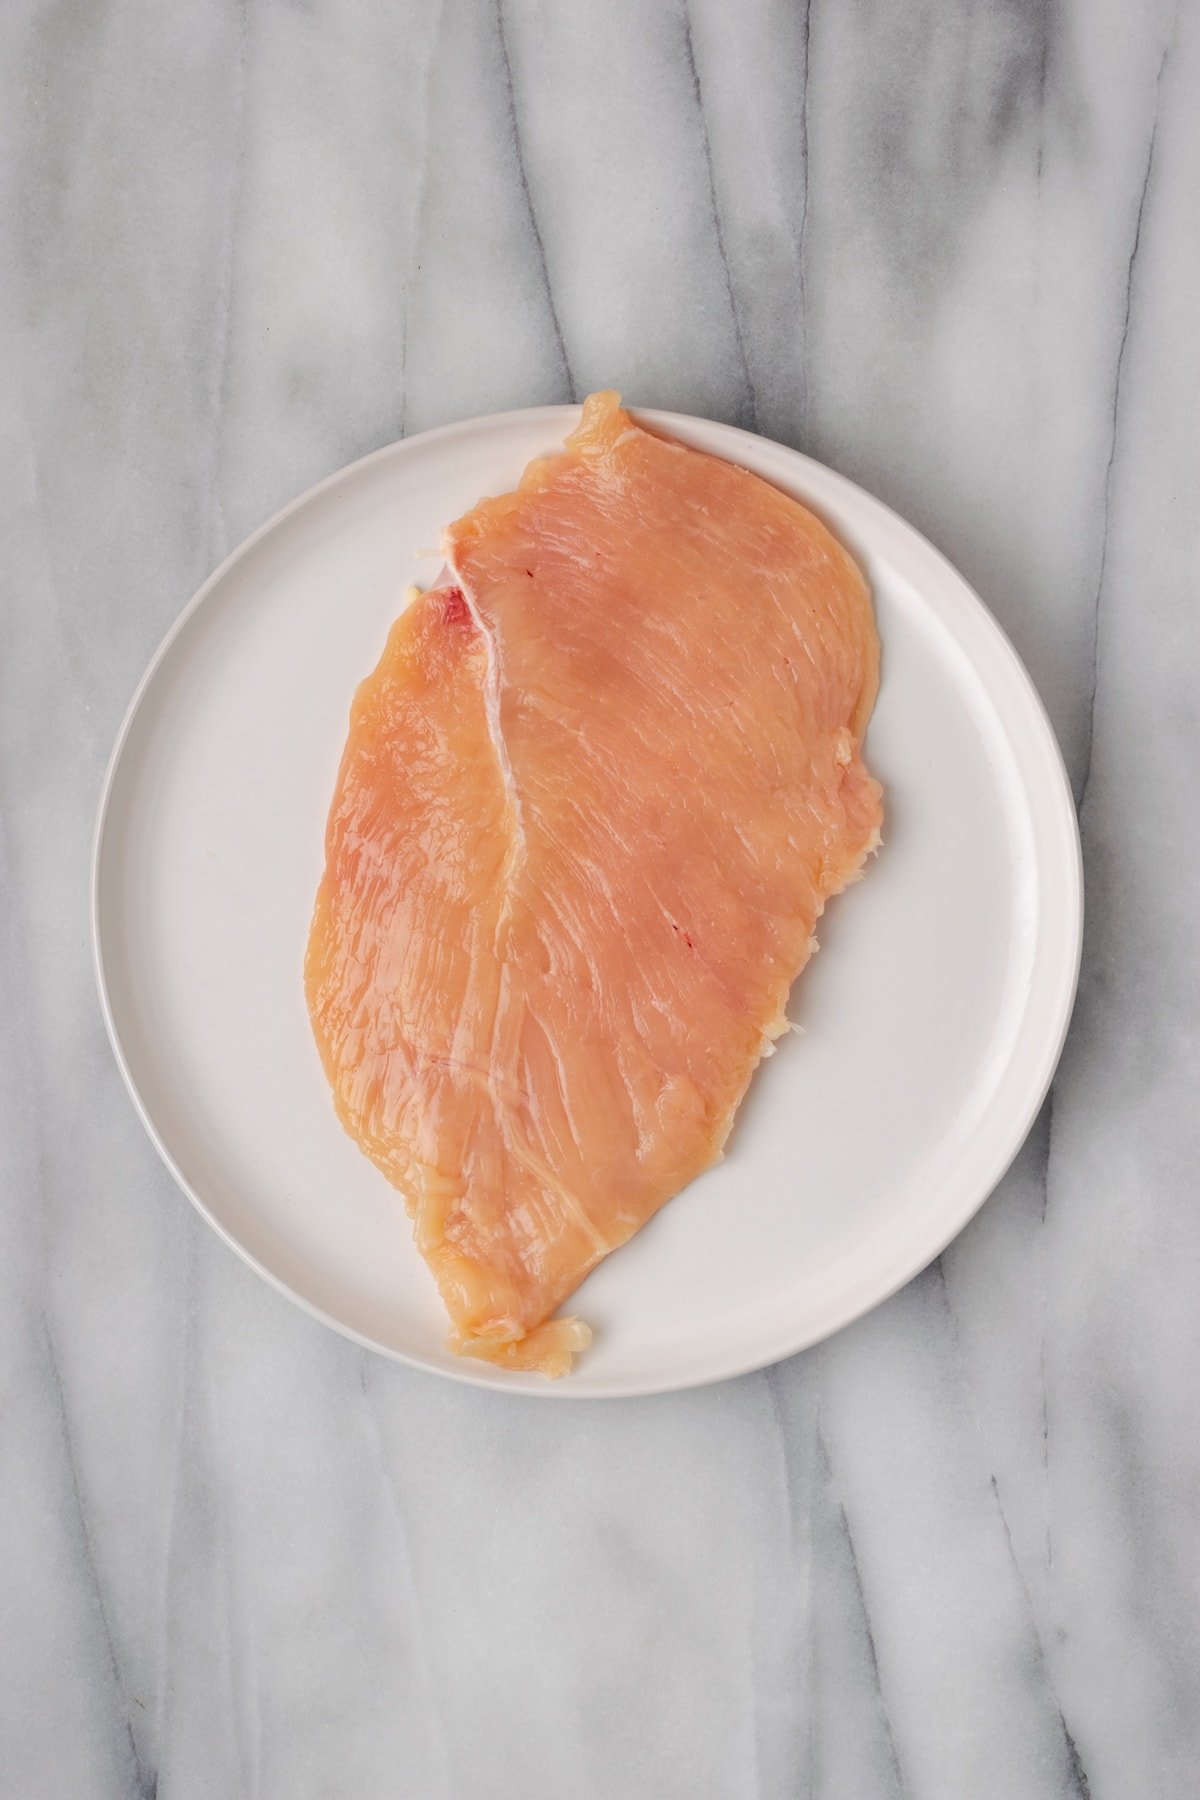 A raw chicken breast on a plate